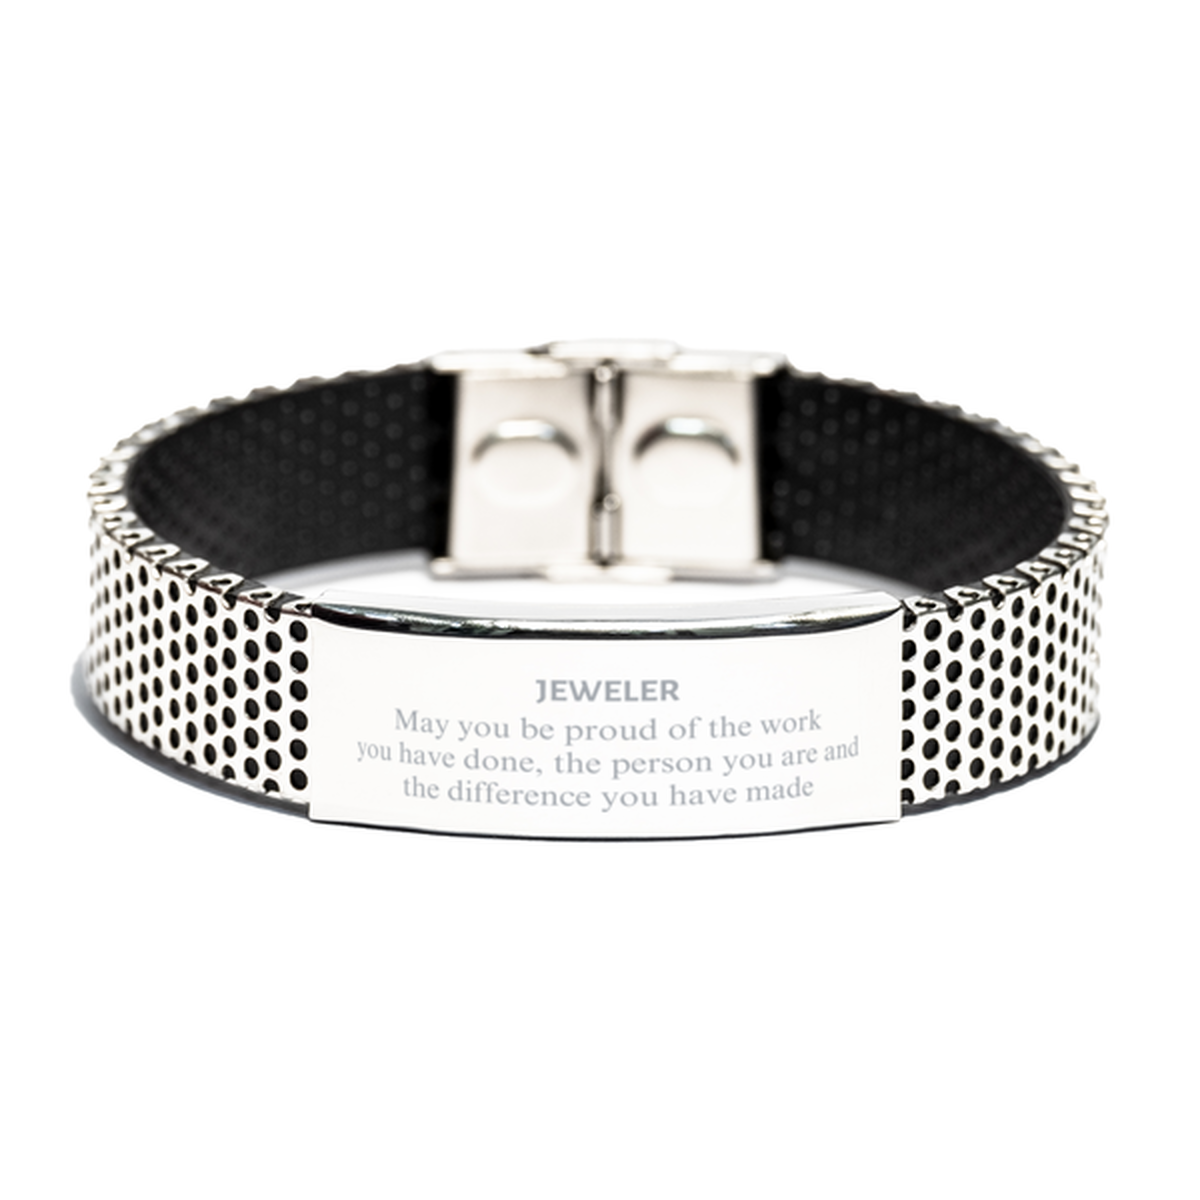 Jeweler May you be proud of the work you have done, Retirement Jeweler Stainless Steel Bracelet for Colleague Appreciation Gifts Amazing for Jeweler